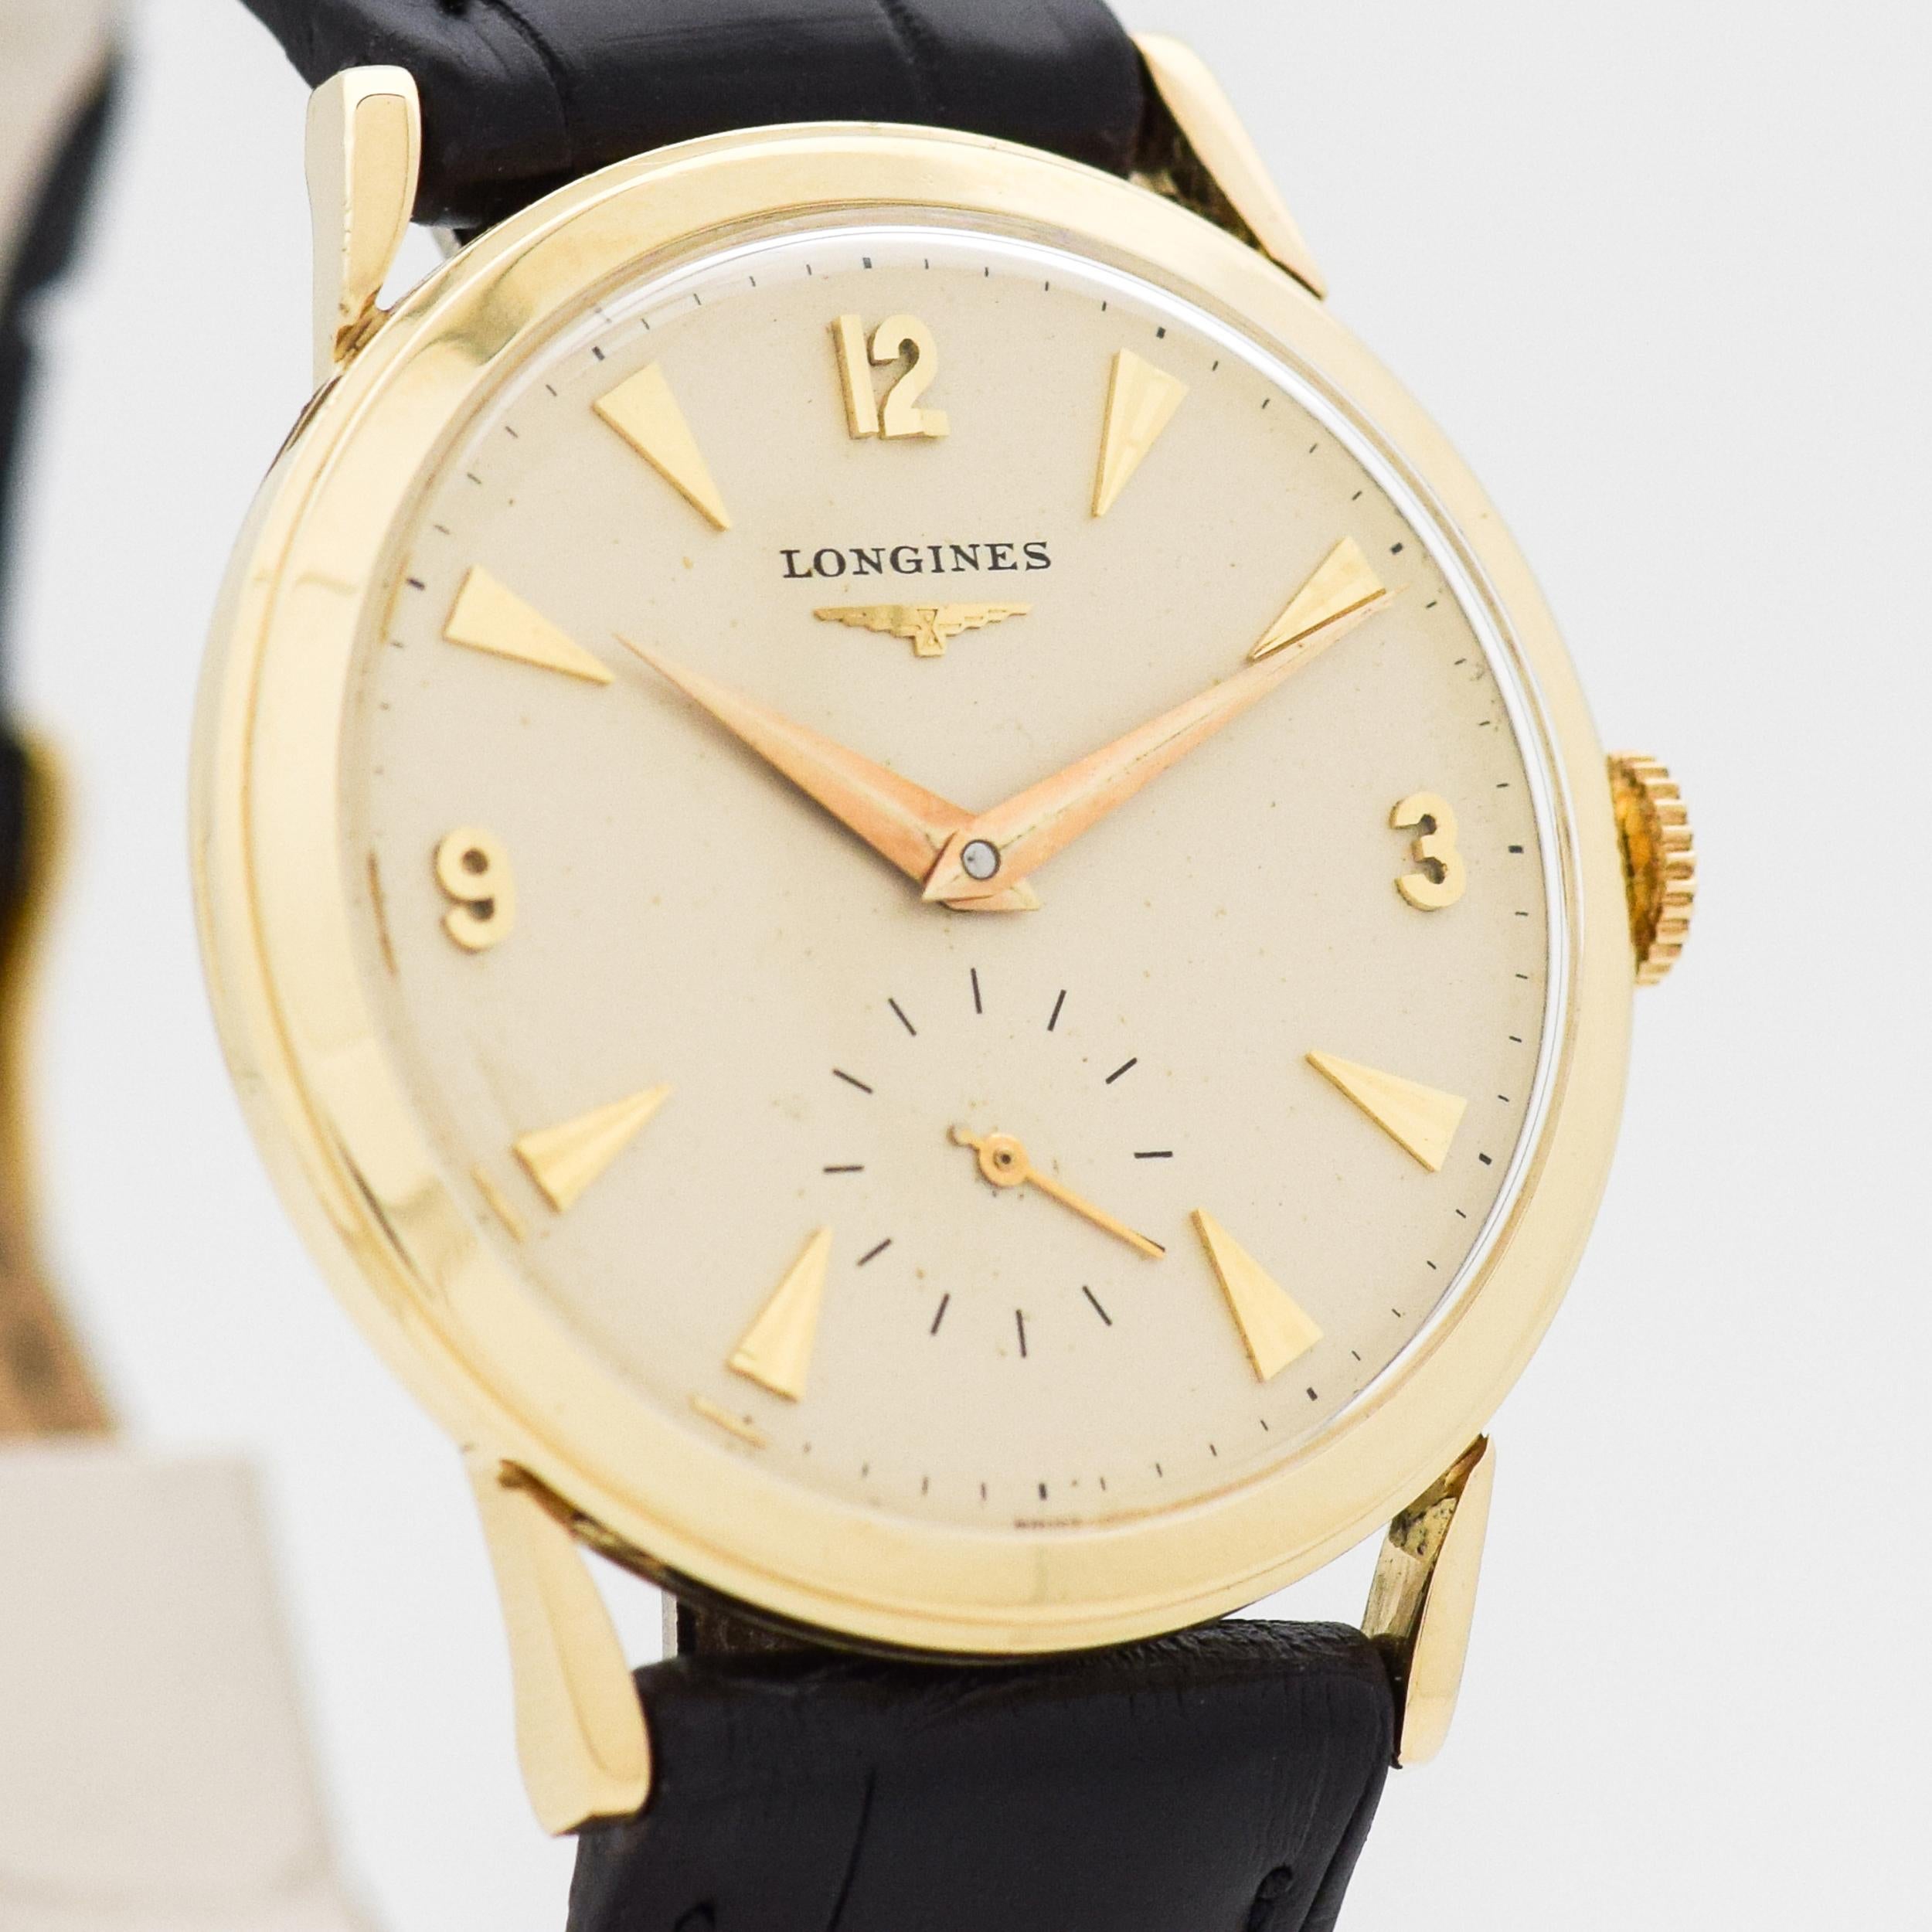 1958 Vintage Longines Watch. 14K Yellow Gold case. Original, silver dial with applied, yellow gold-colored Arabic numerals & arrow markers. 32mm wide. Equipped with a 17-jewel, manual caliber movement. Featured on a Genuine Alligator Matte Black